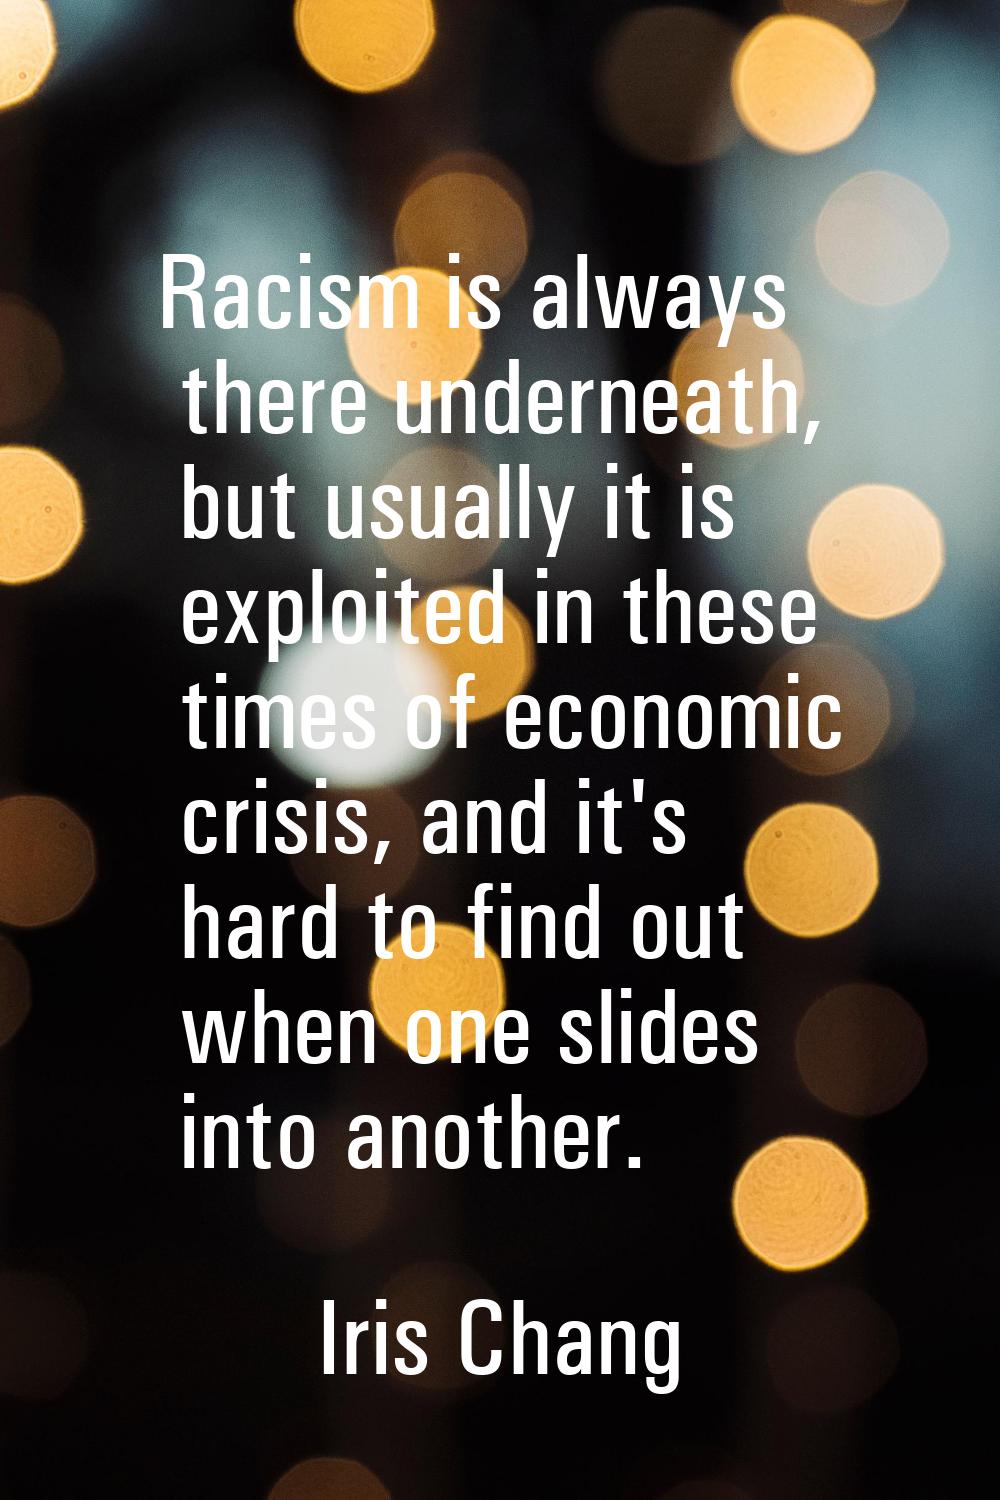 Racism is always there underneath, but usually it is exploited in these times of economic crisis, a